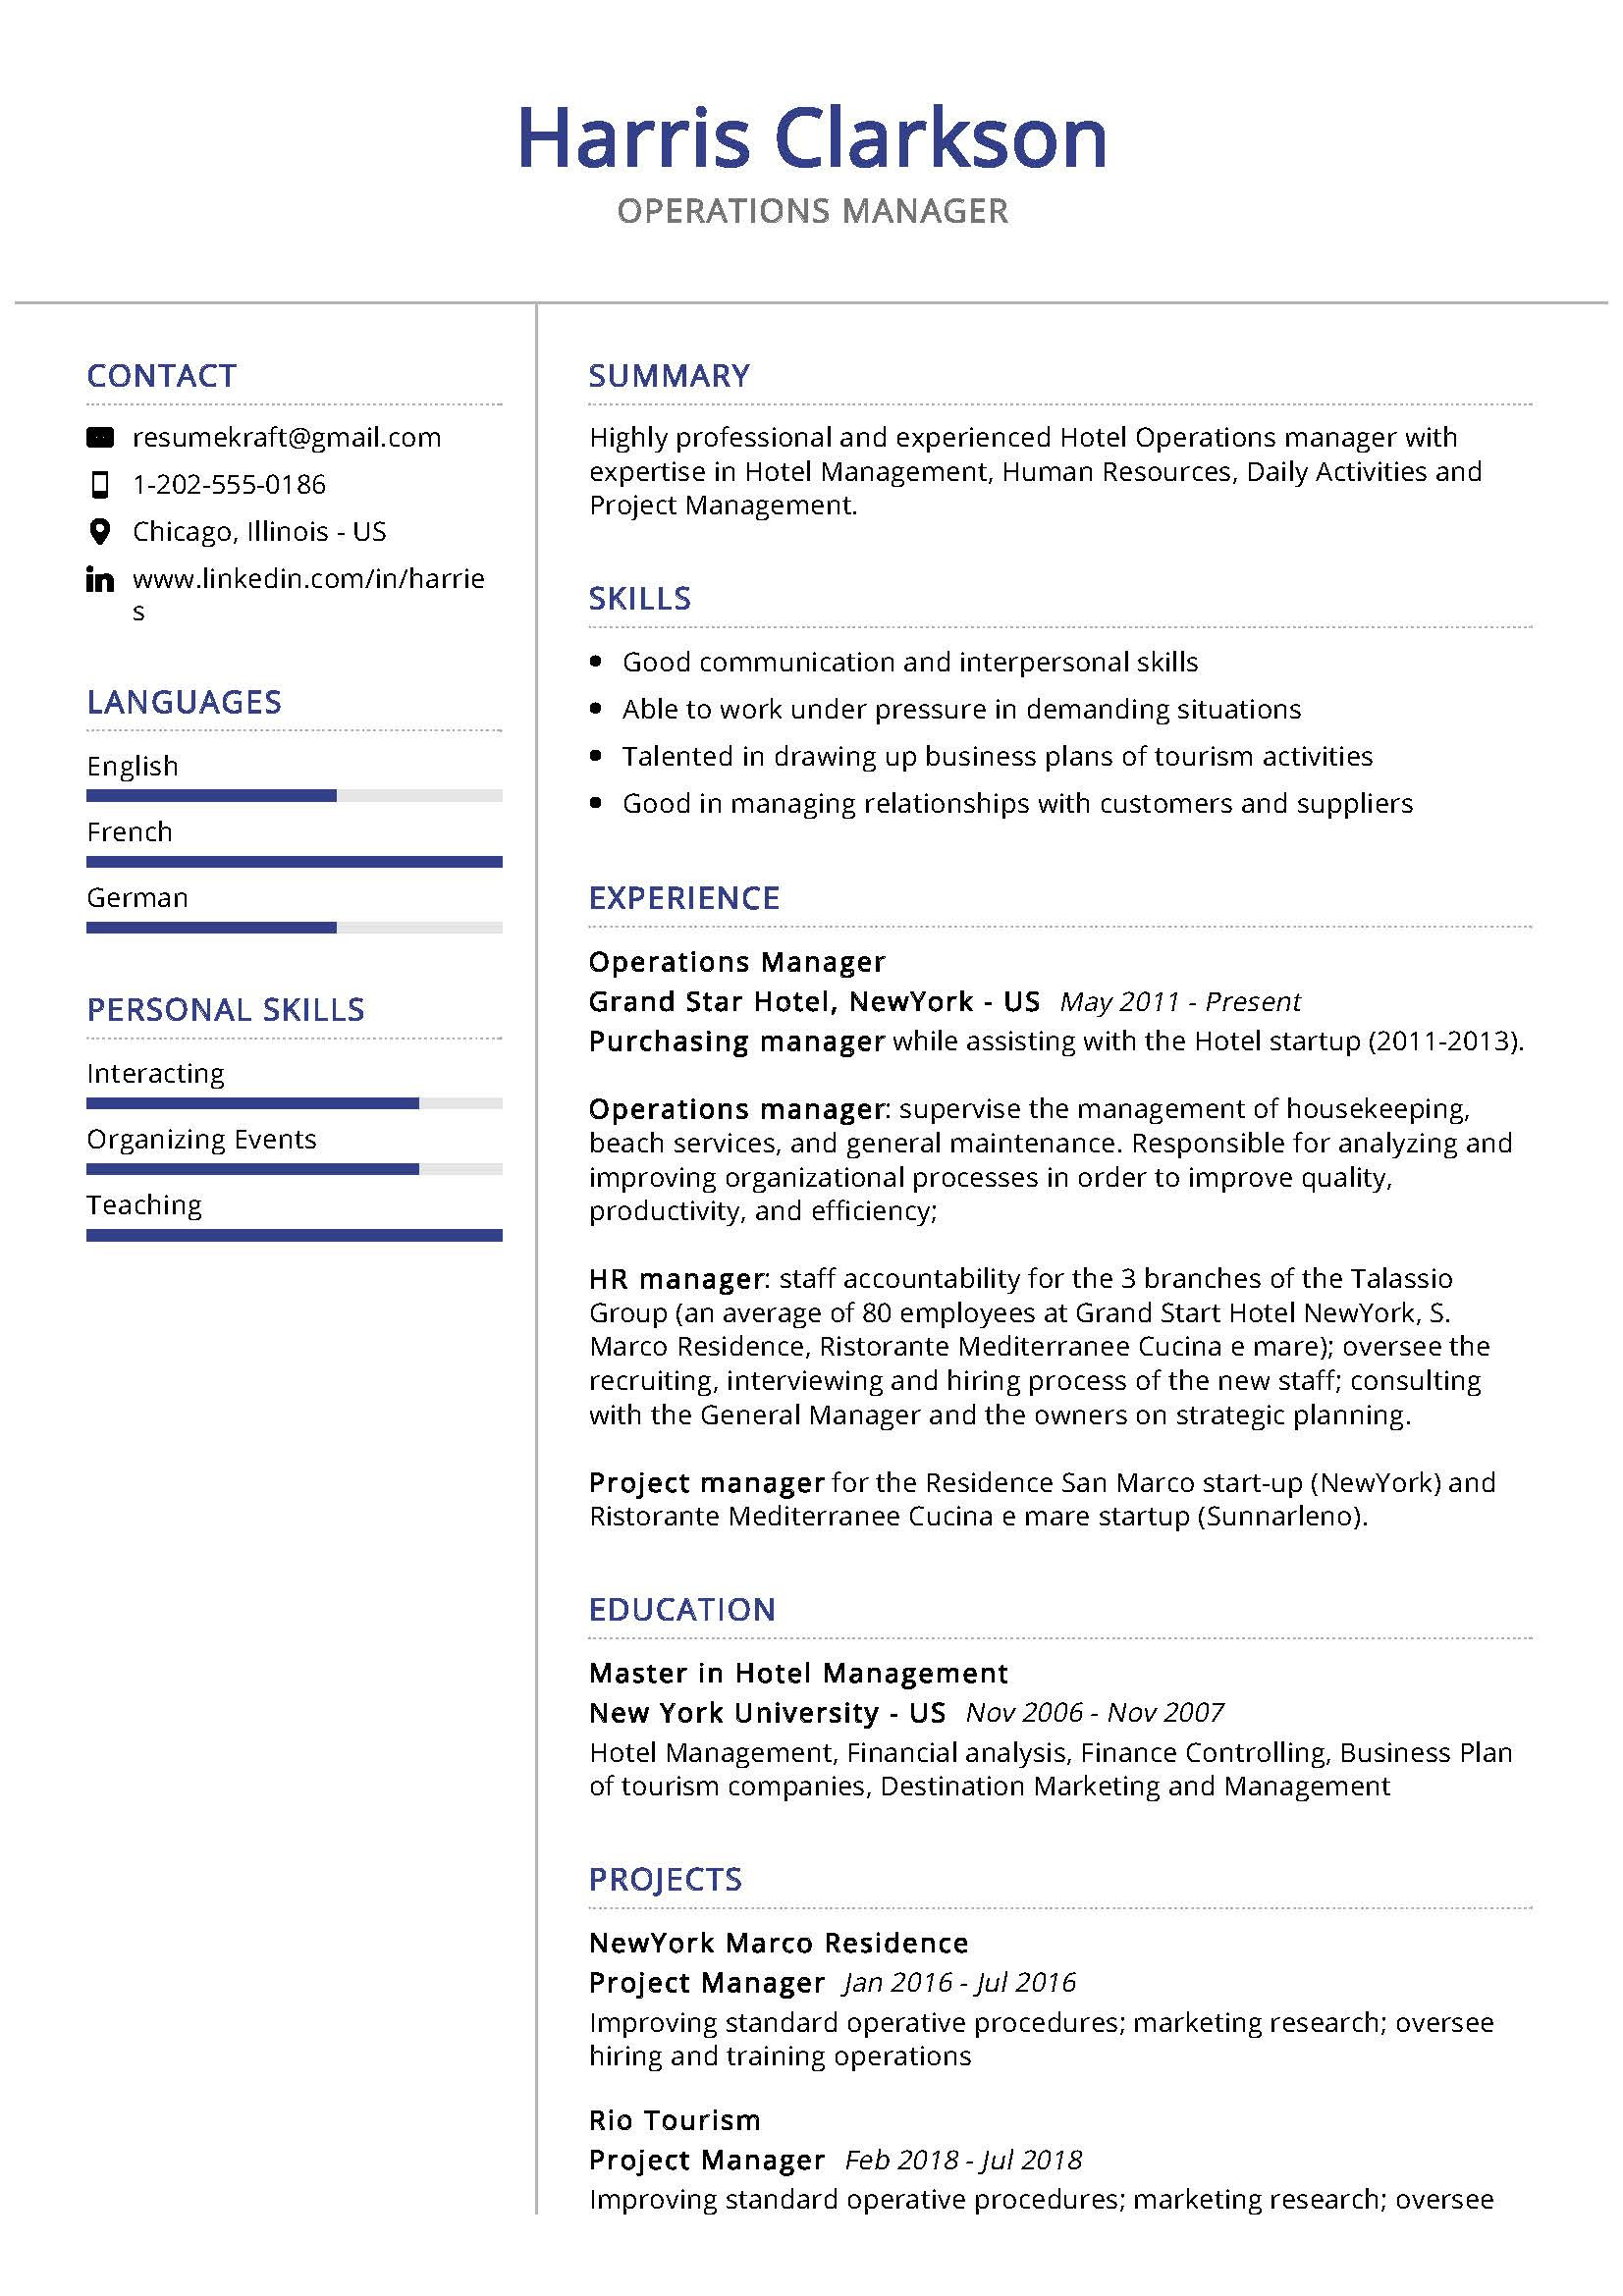 Bank Branch Operations Manager Resume Sample Operations Manager Resume Sample 2022 Writing Tips – Resumekraft